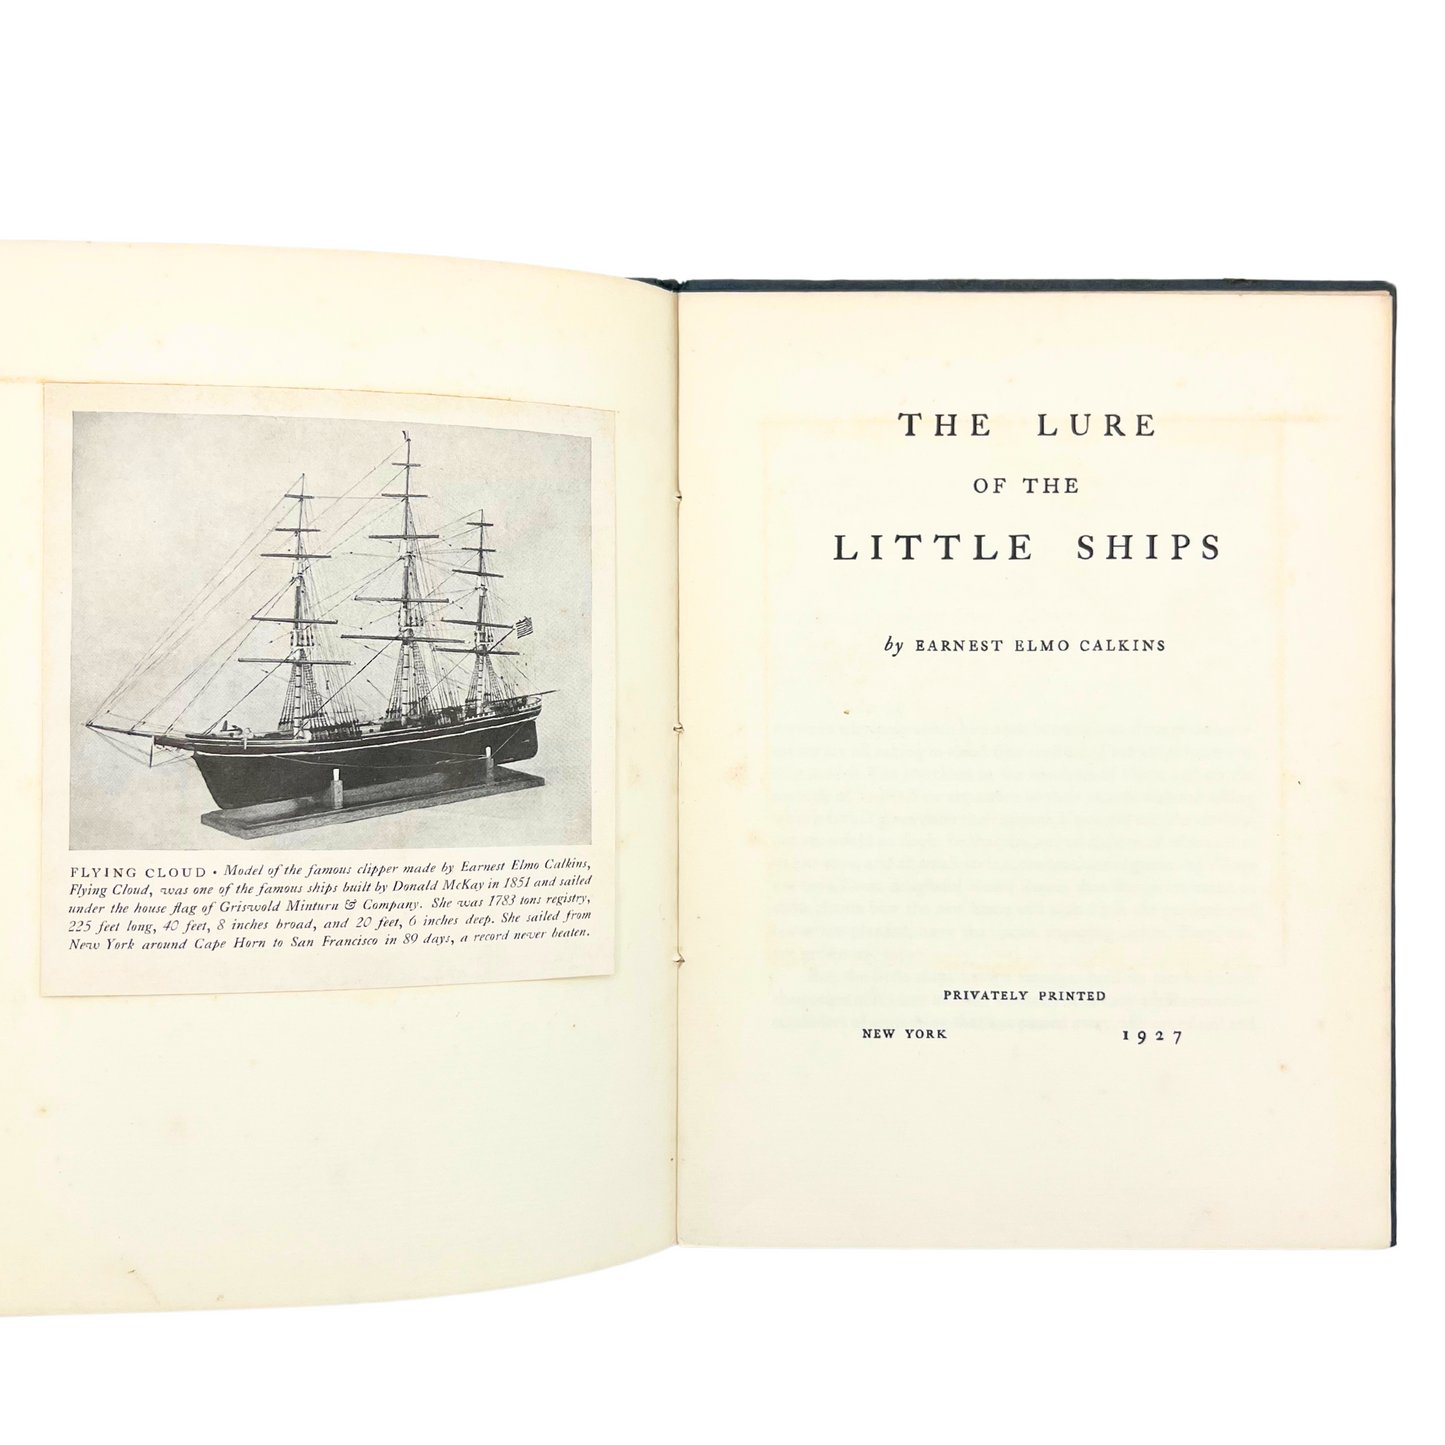 1927 book: The Lure of the Little Ships